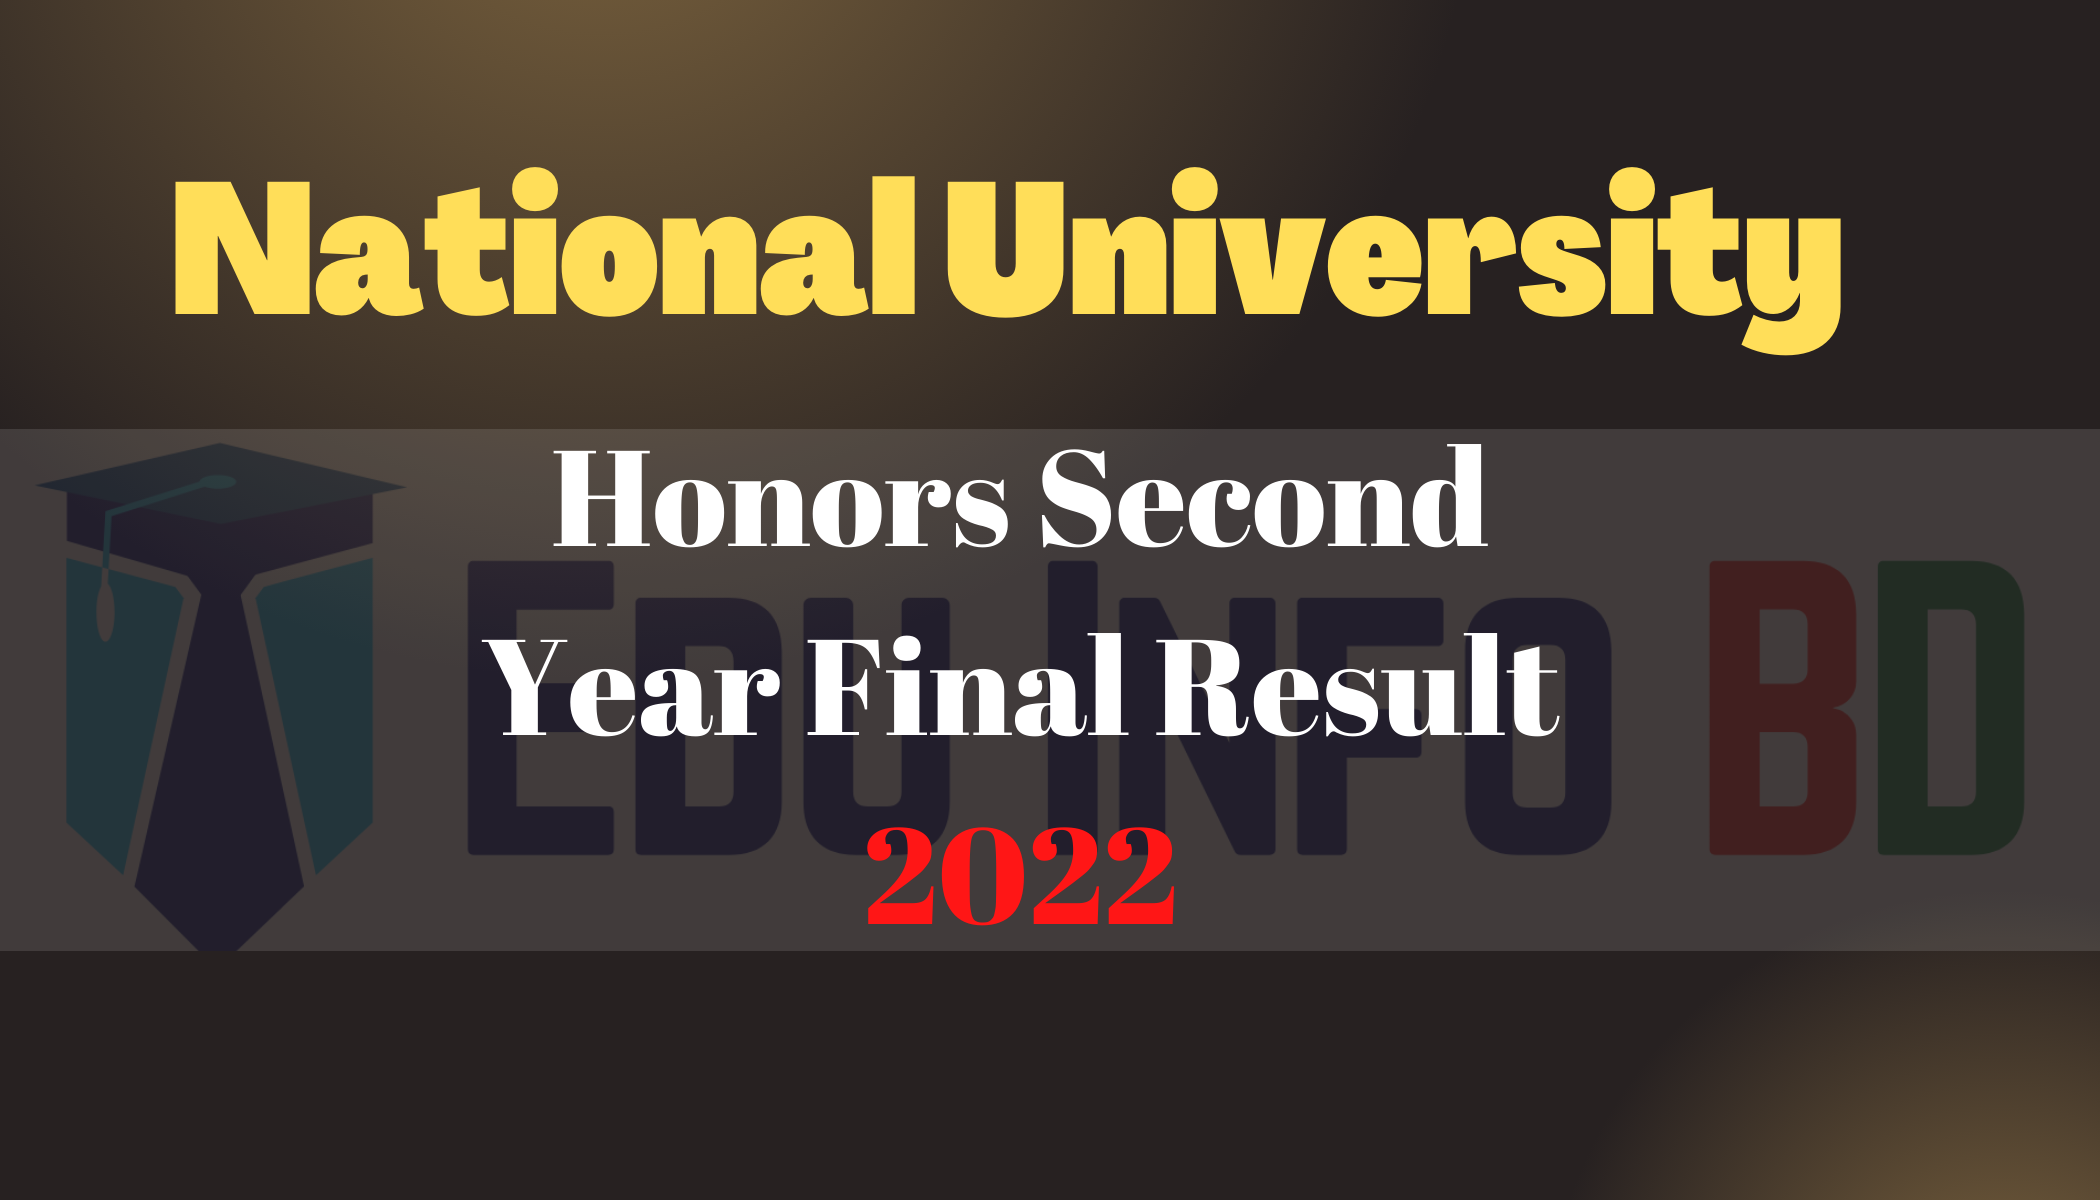 Honors Second Year Final Result 2022 [Published]